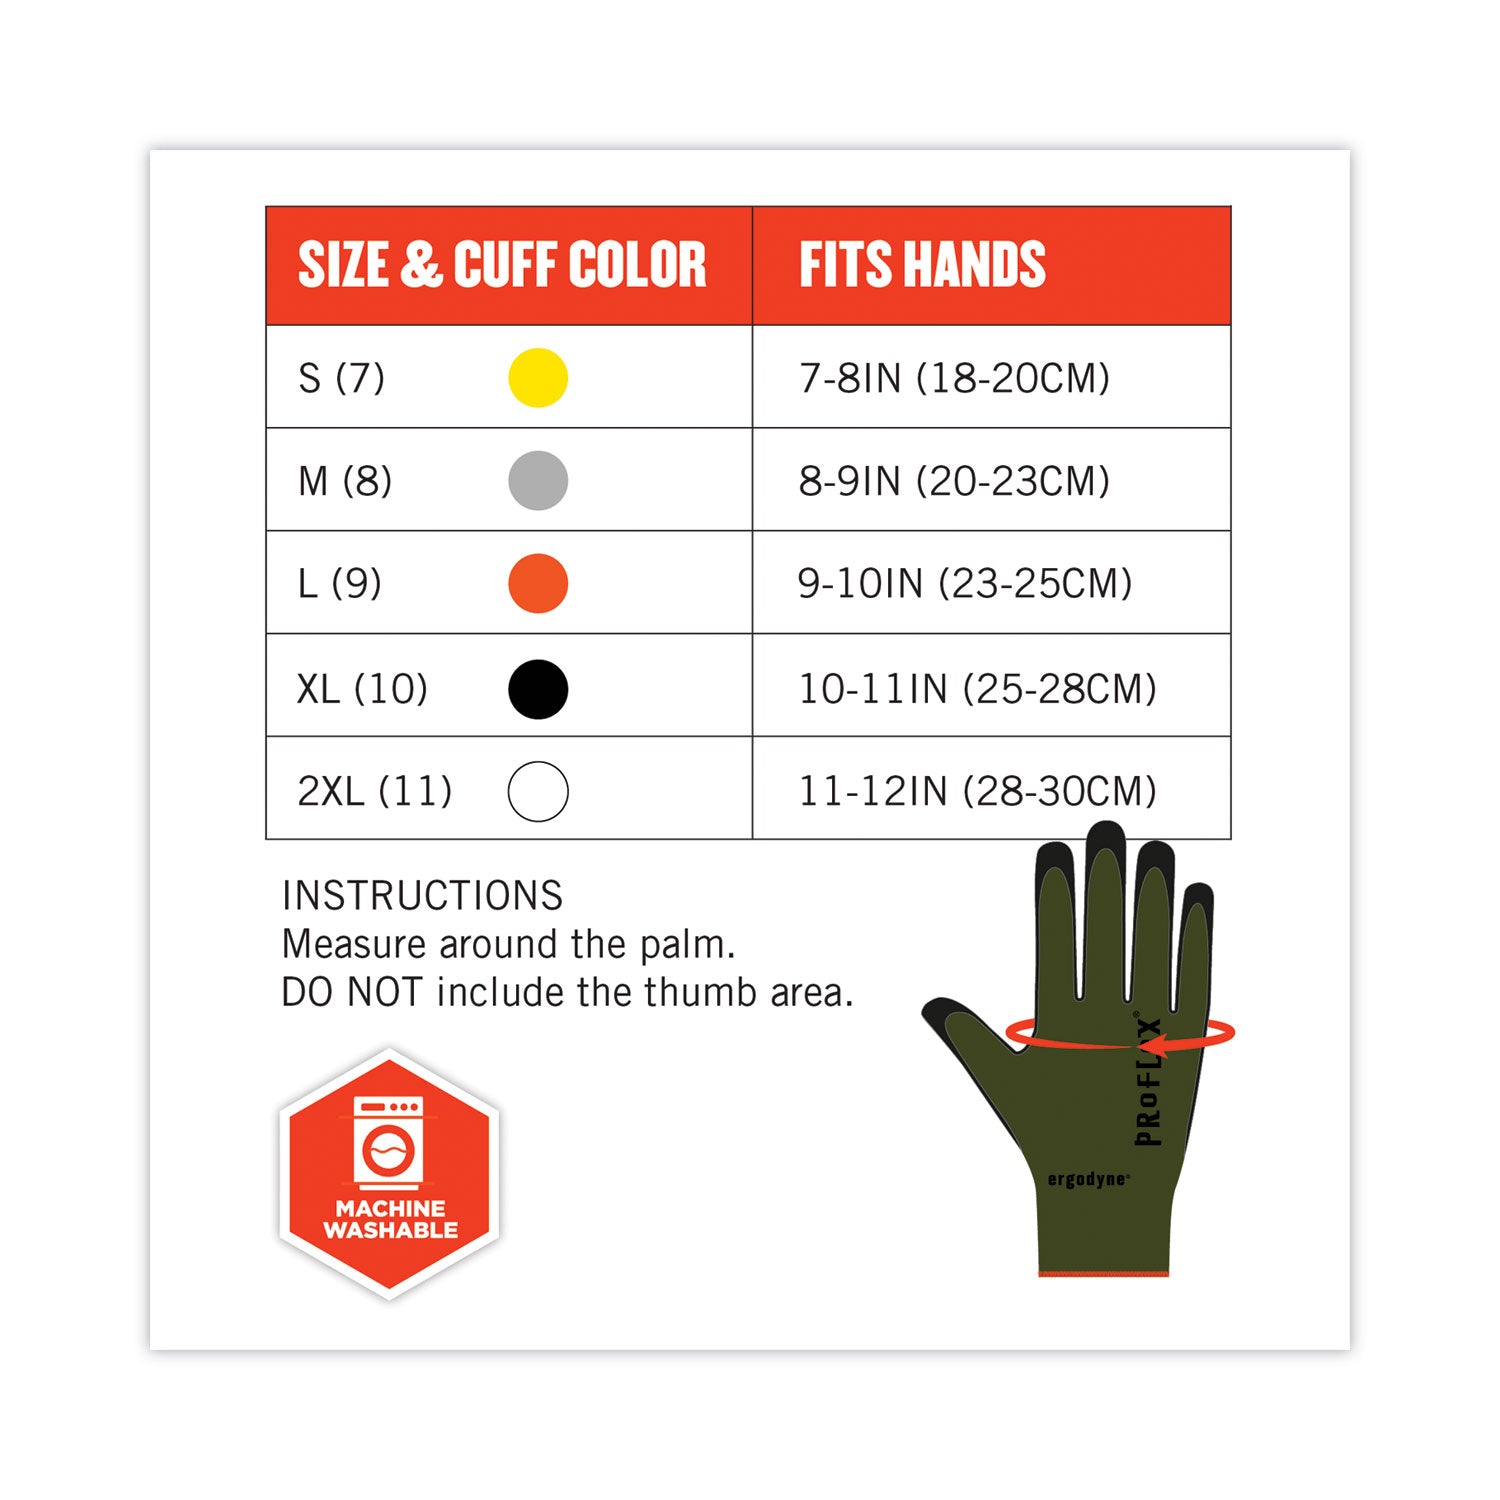 proflex-7042-ansi-a4-nitrile-coated-cr-gloves-green-x-large-12-pairs-pack-ships-in-1-3-business-days_ego10335 - 7